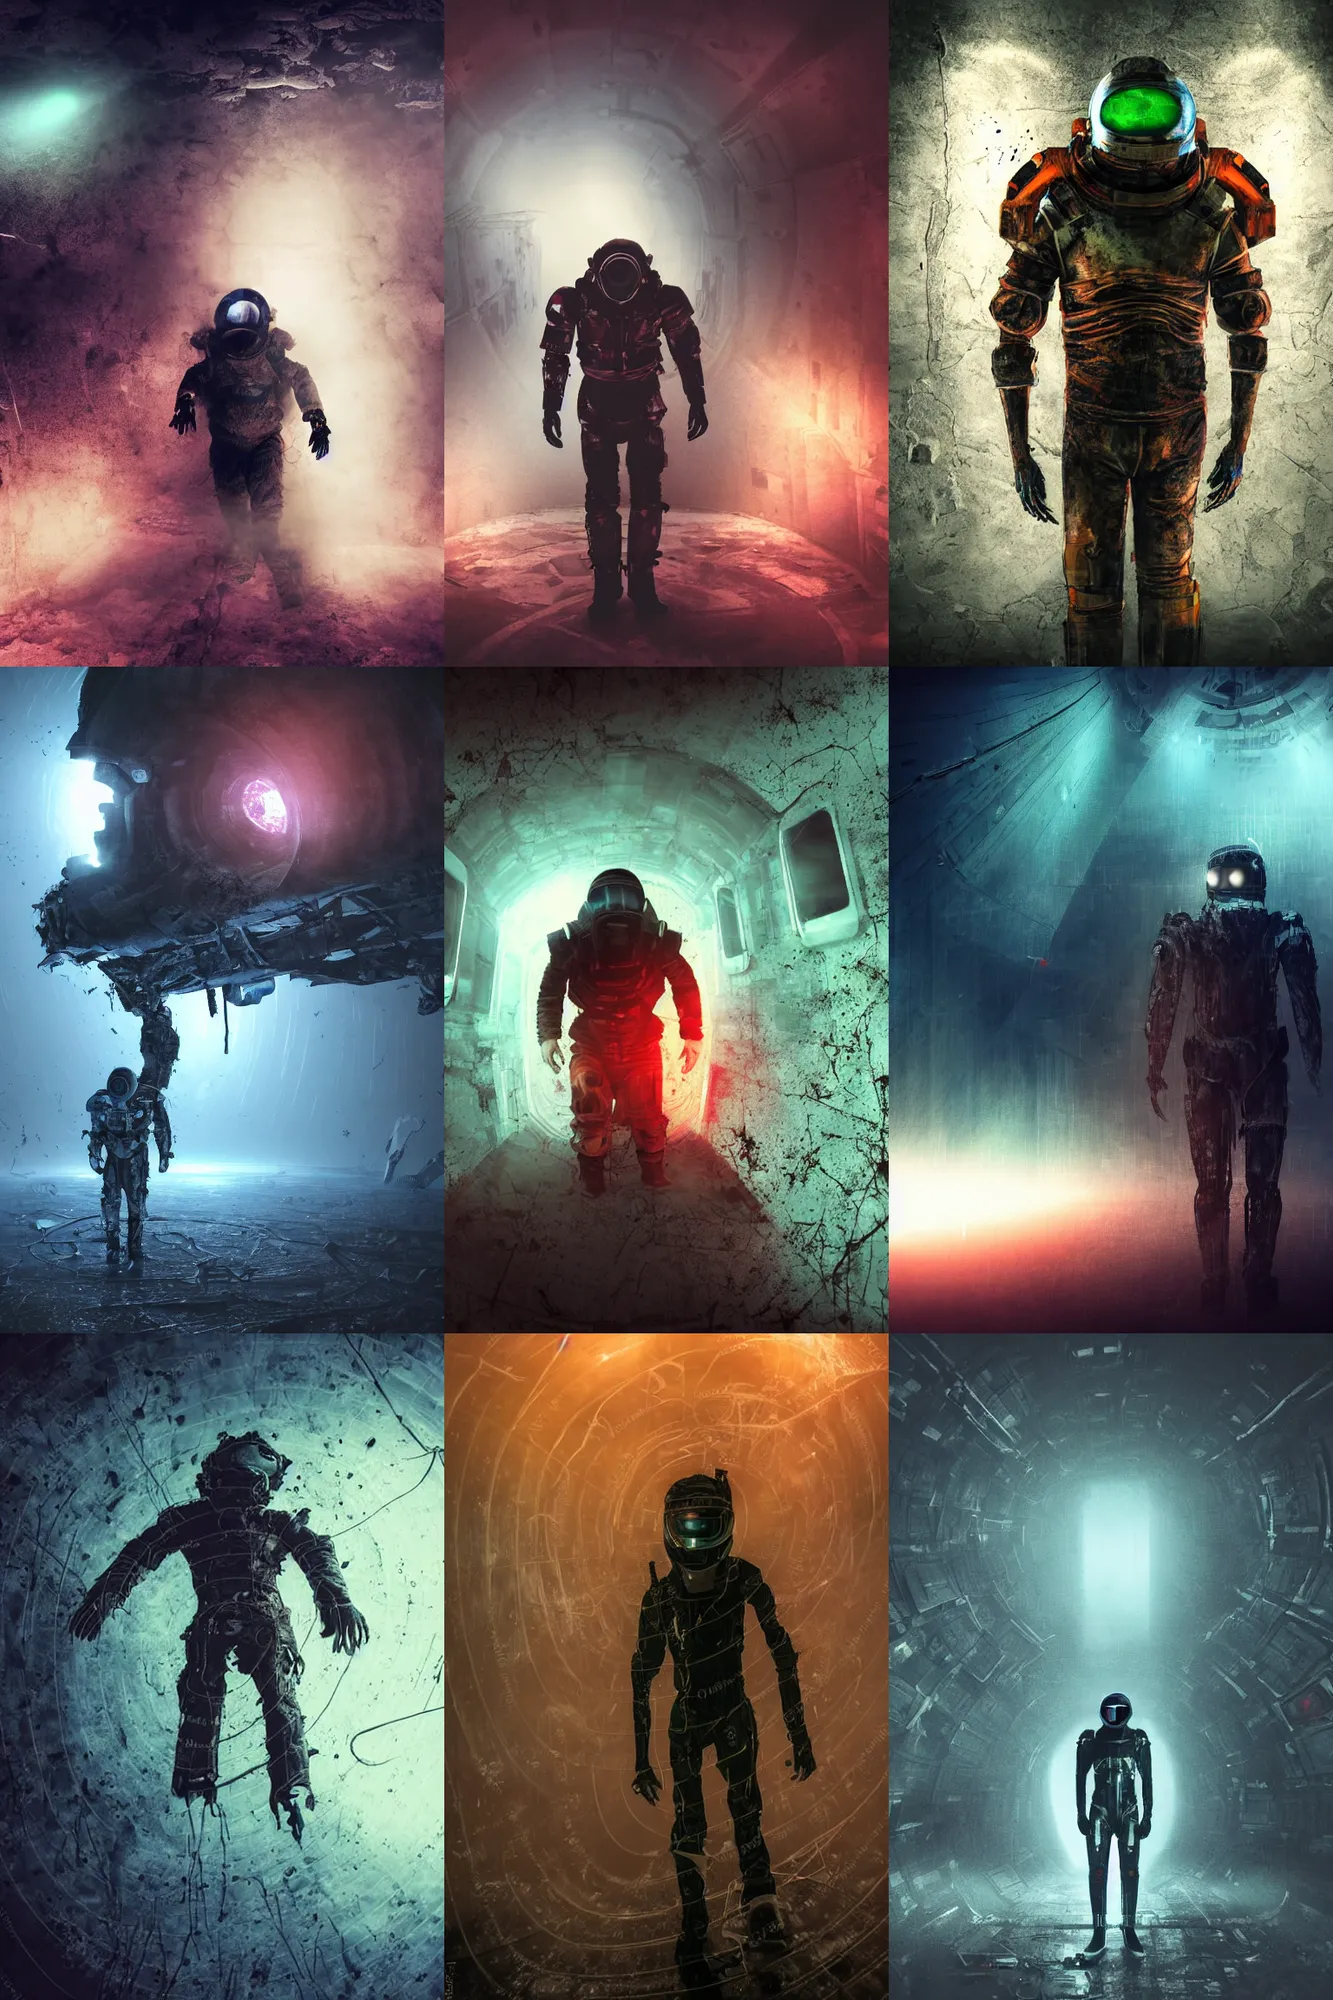 Prompt: horror movie scene with moody colors of an individual in futuristic space suit walking through a broken down deep space mining space station, the walls are broken and twisted metal, rusting metal adorns the walls, tense atmosphere, misty floats through the air, amazing value control, dead space, moody colors, dramatic lighting